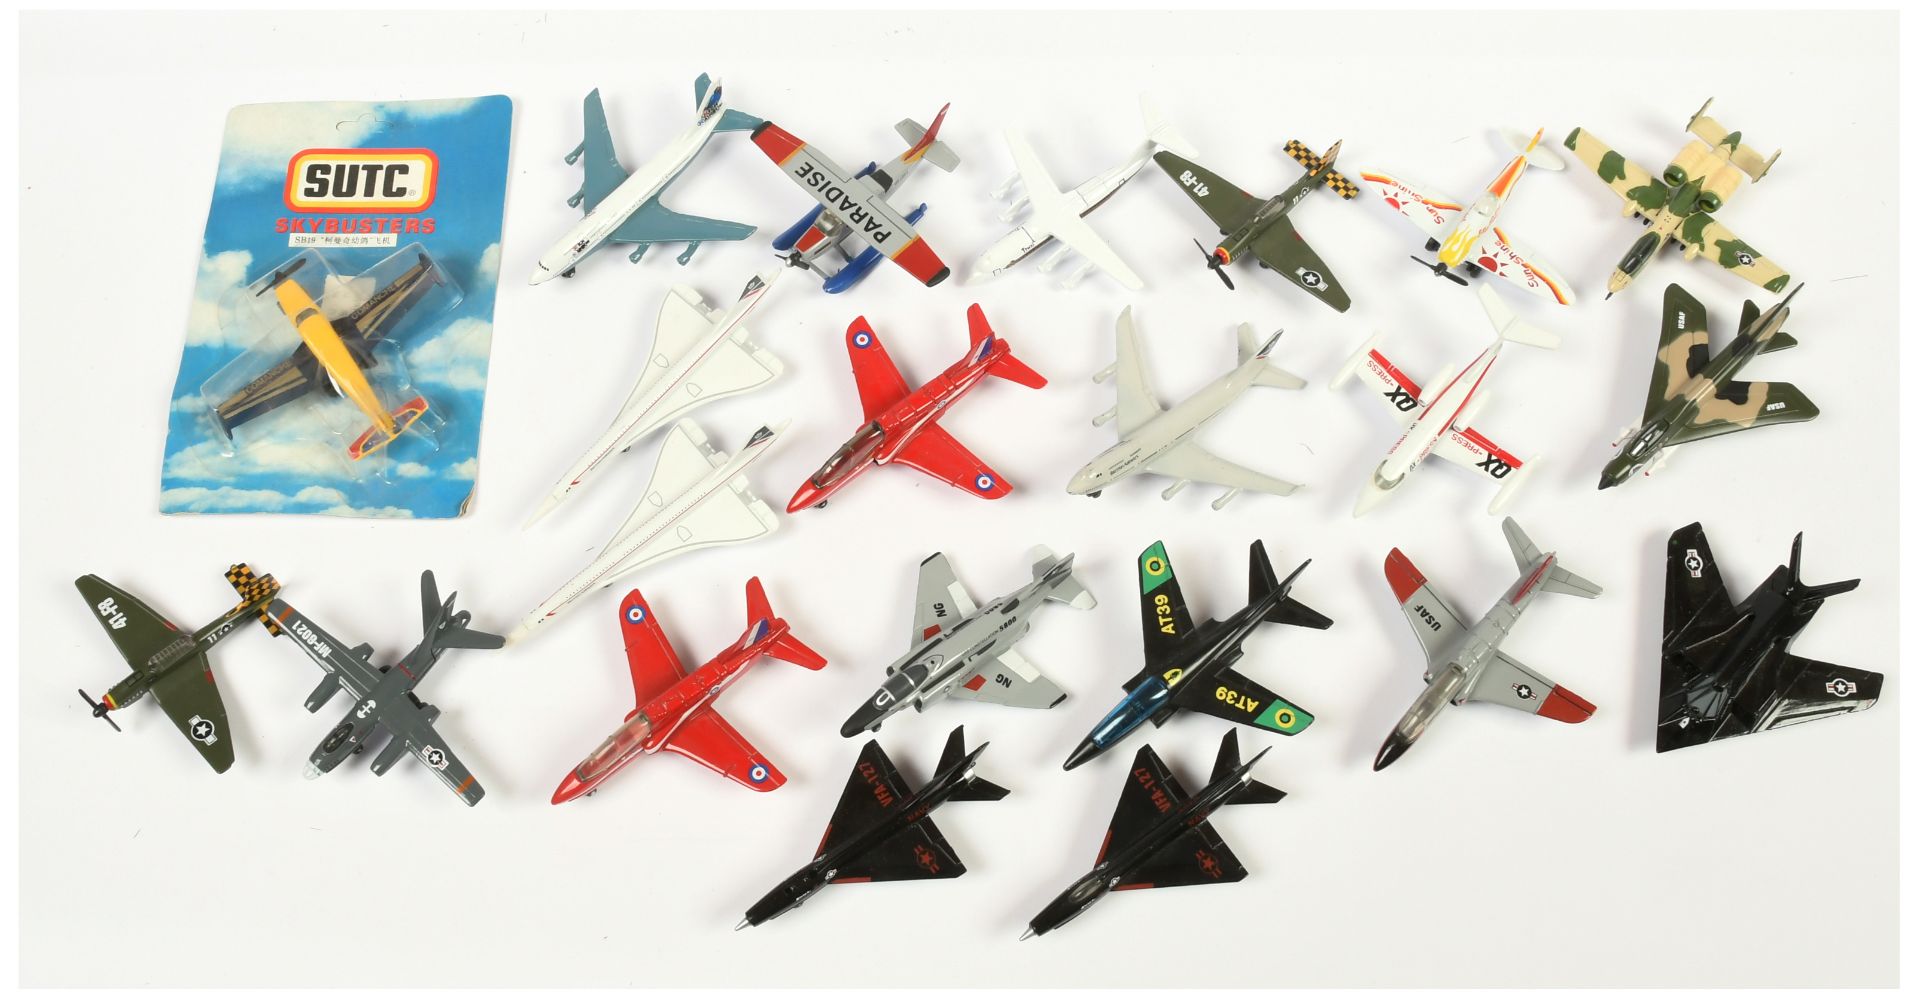 Matchbox Skybusters group of Made in China SUTC (Shanghai Universal Toy Company) Aircraft